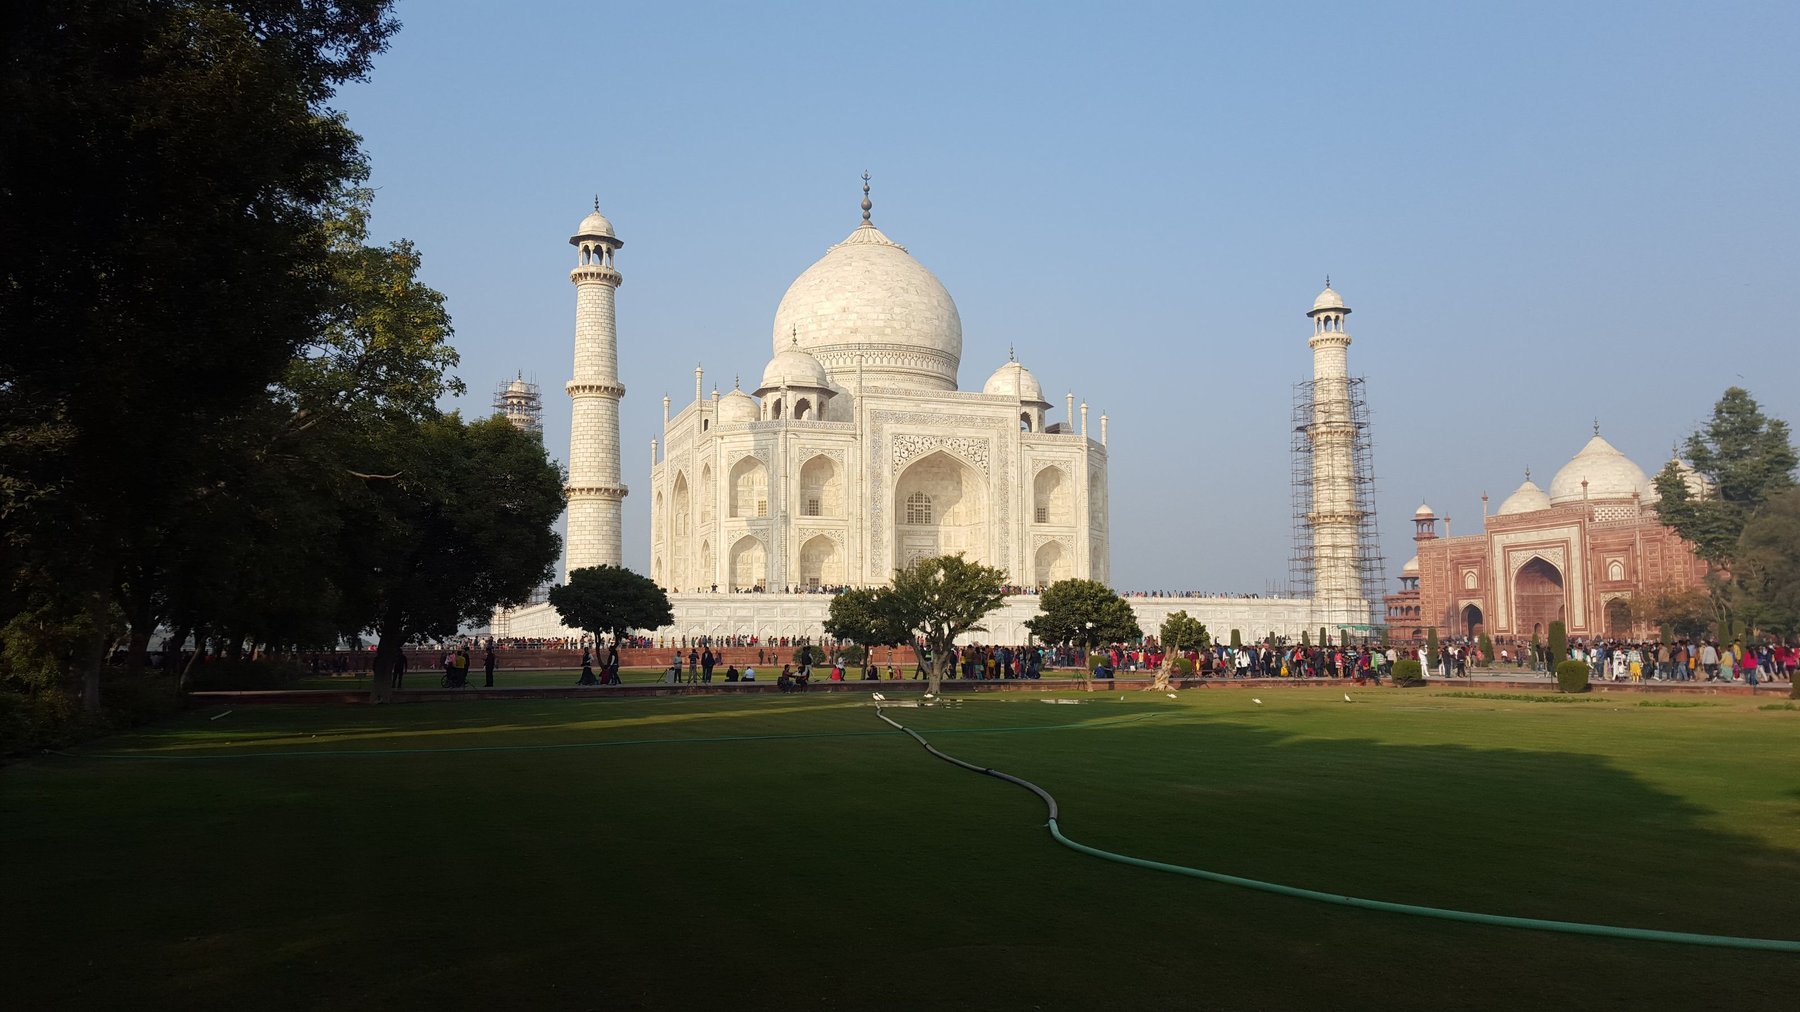 The Taj Mahal from afar, showing a perfect lawn surrounding the mausoleum.